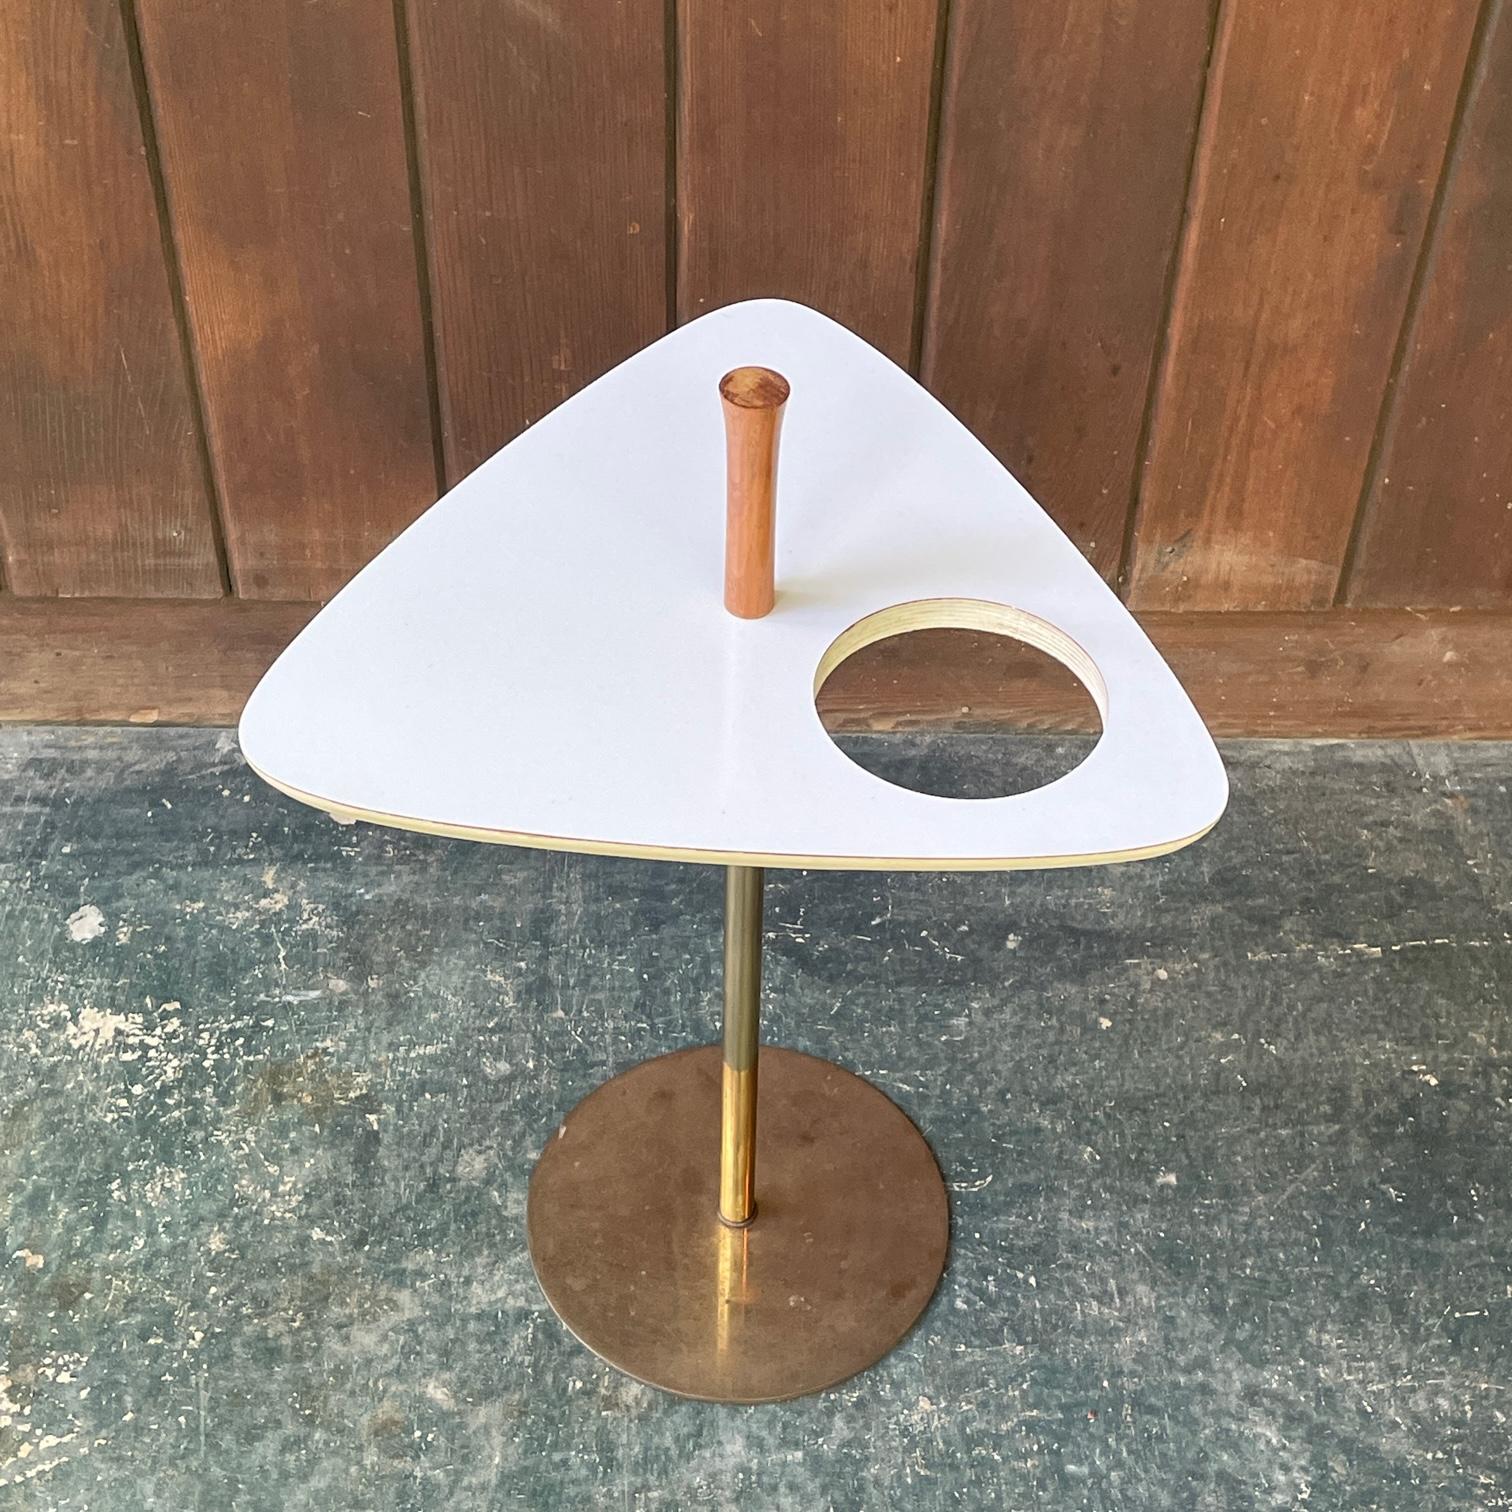 Wonderful petite 'pick-up' or standing ashtray side table. Missing the ashtray.

W 15.5 x D 14.5 x Table H 17 5/8 in. / Handle H 22.25 in.